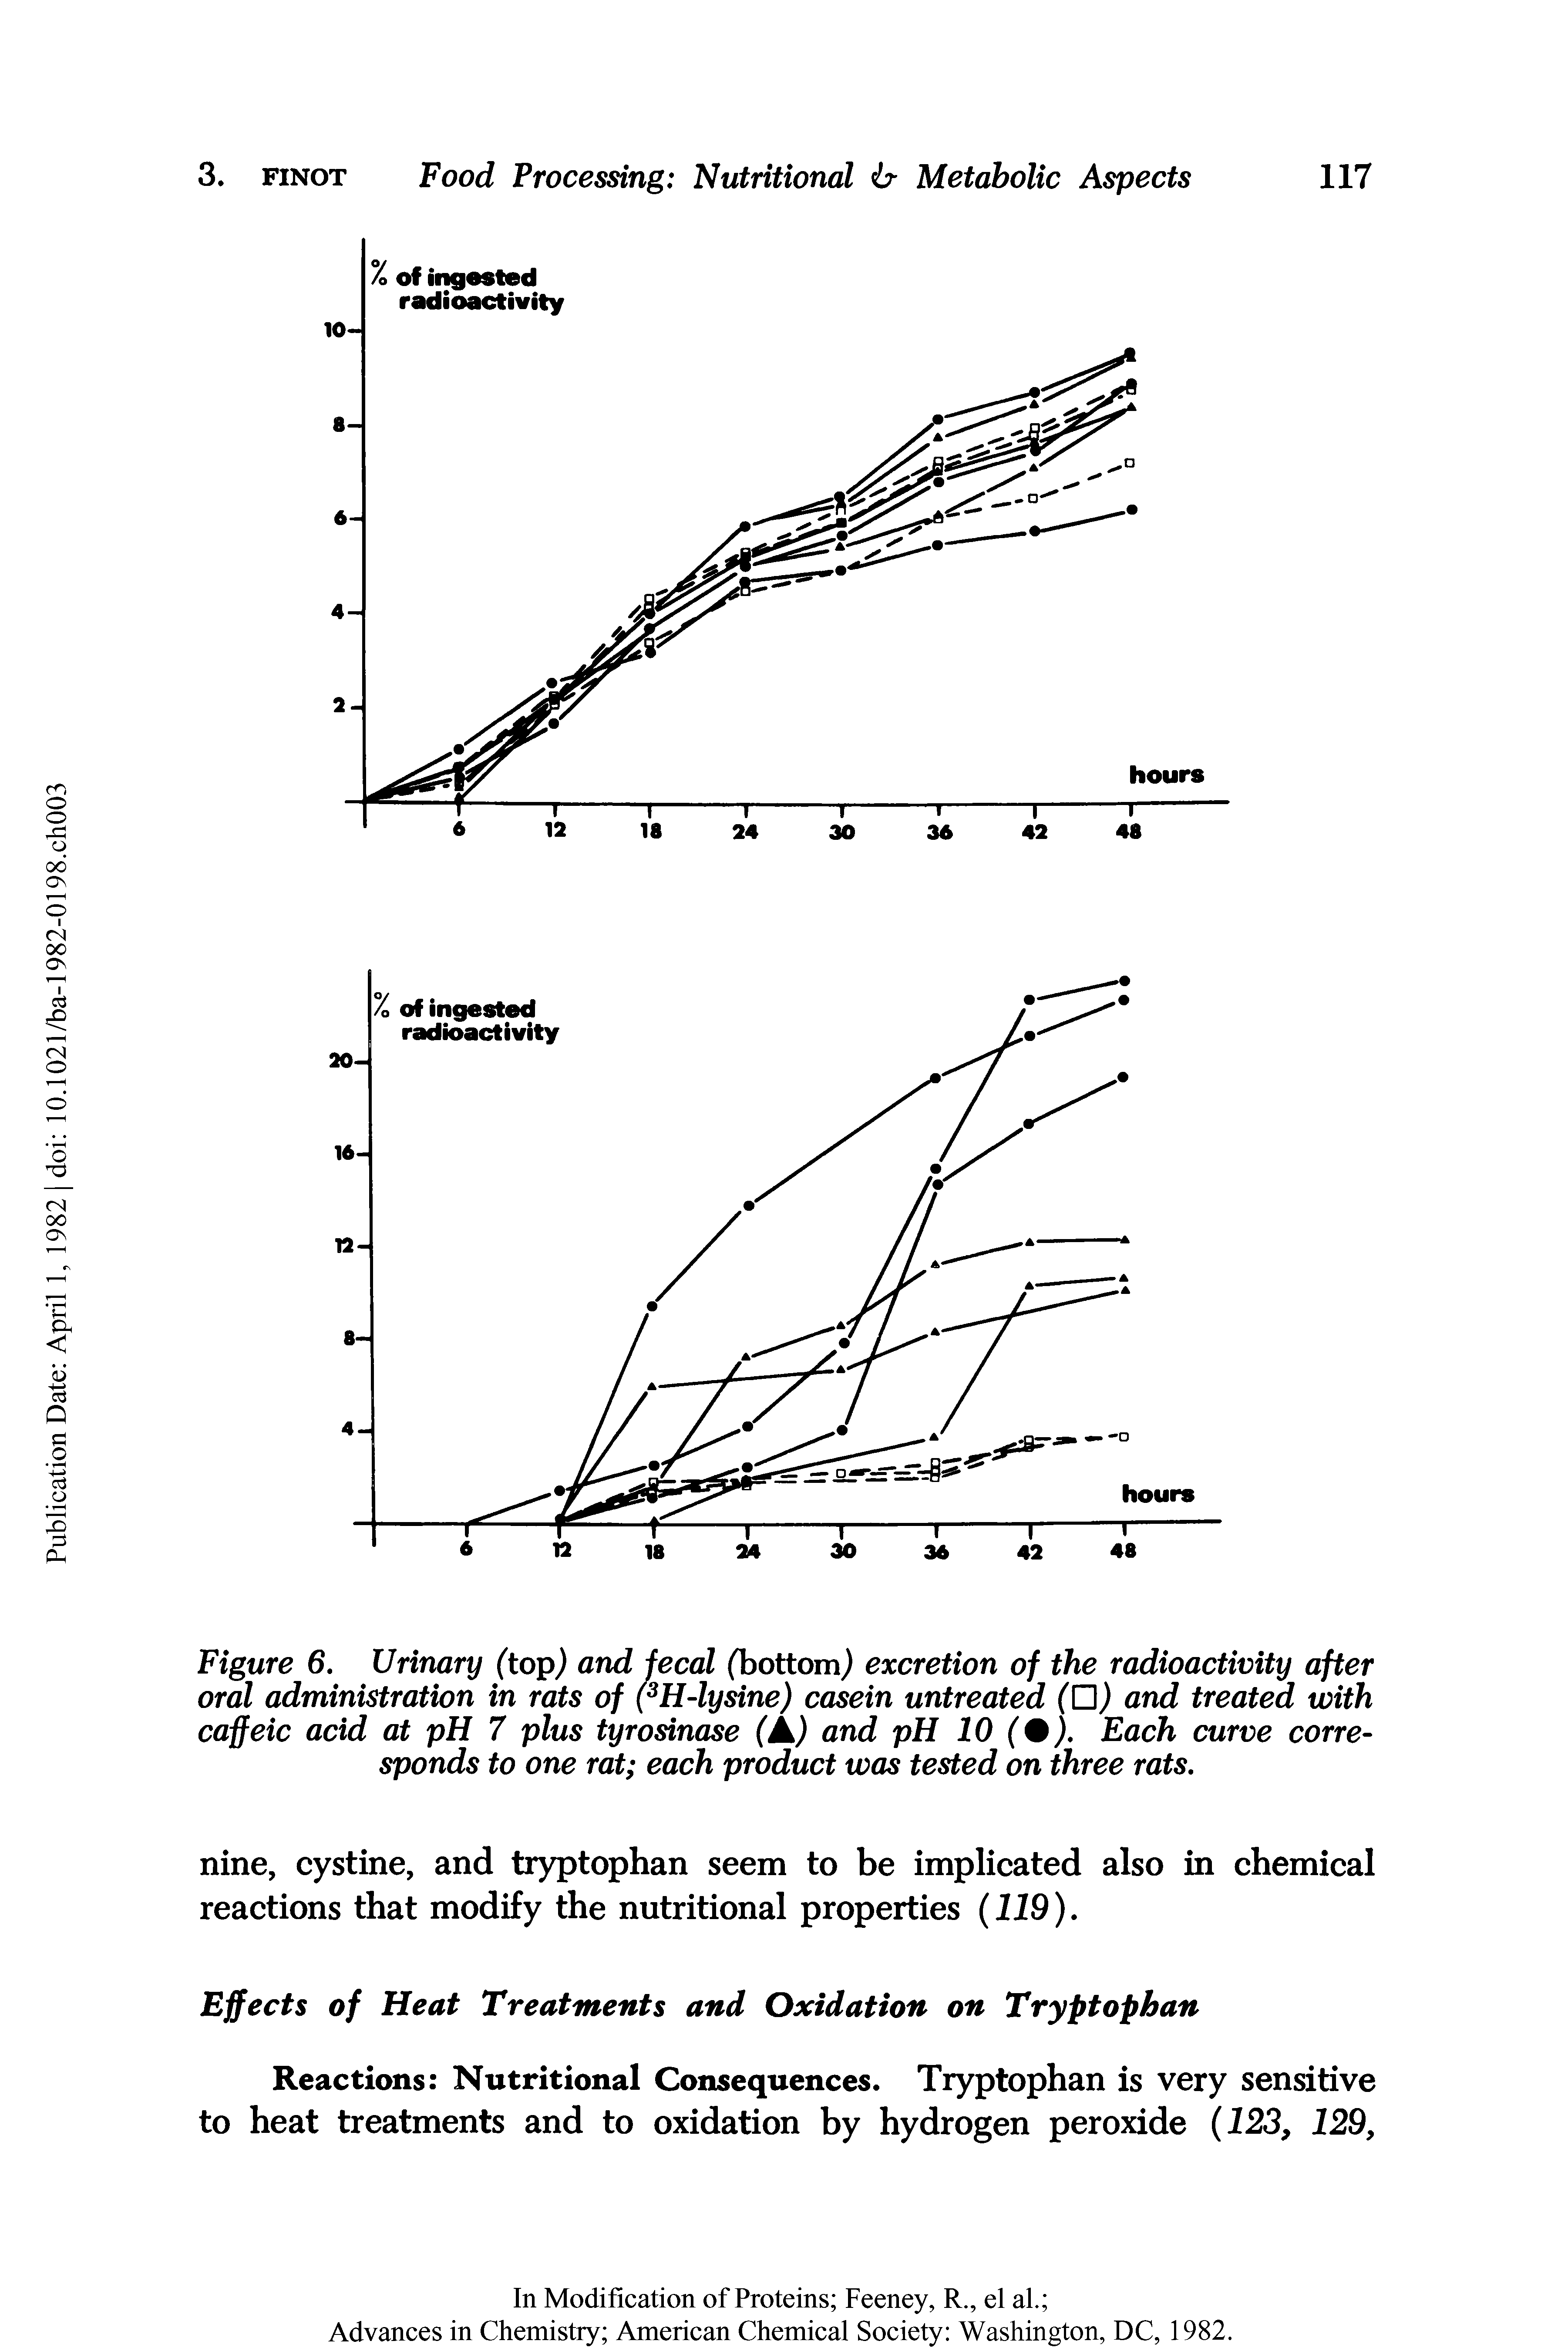 Figure 6. Urinary (top) and fecal (bottom) excretion of the radioactivity after oral administration in rats of (3H-lysine) casein untreated ( ) and treated with caffeic acid at pH 7 plus tyrosinase (A) and pH 10 ( ). Each curve corresponds to one rat each product was tested on three rats.